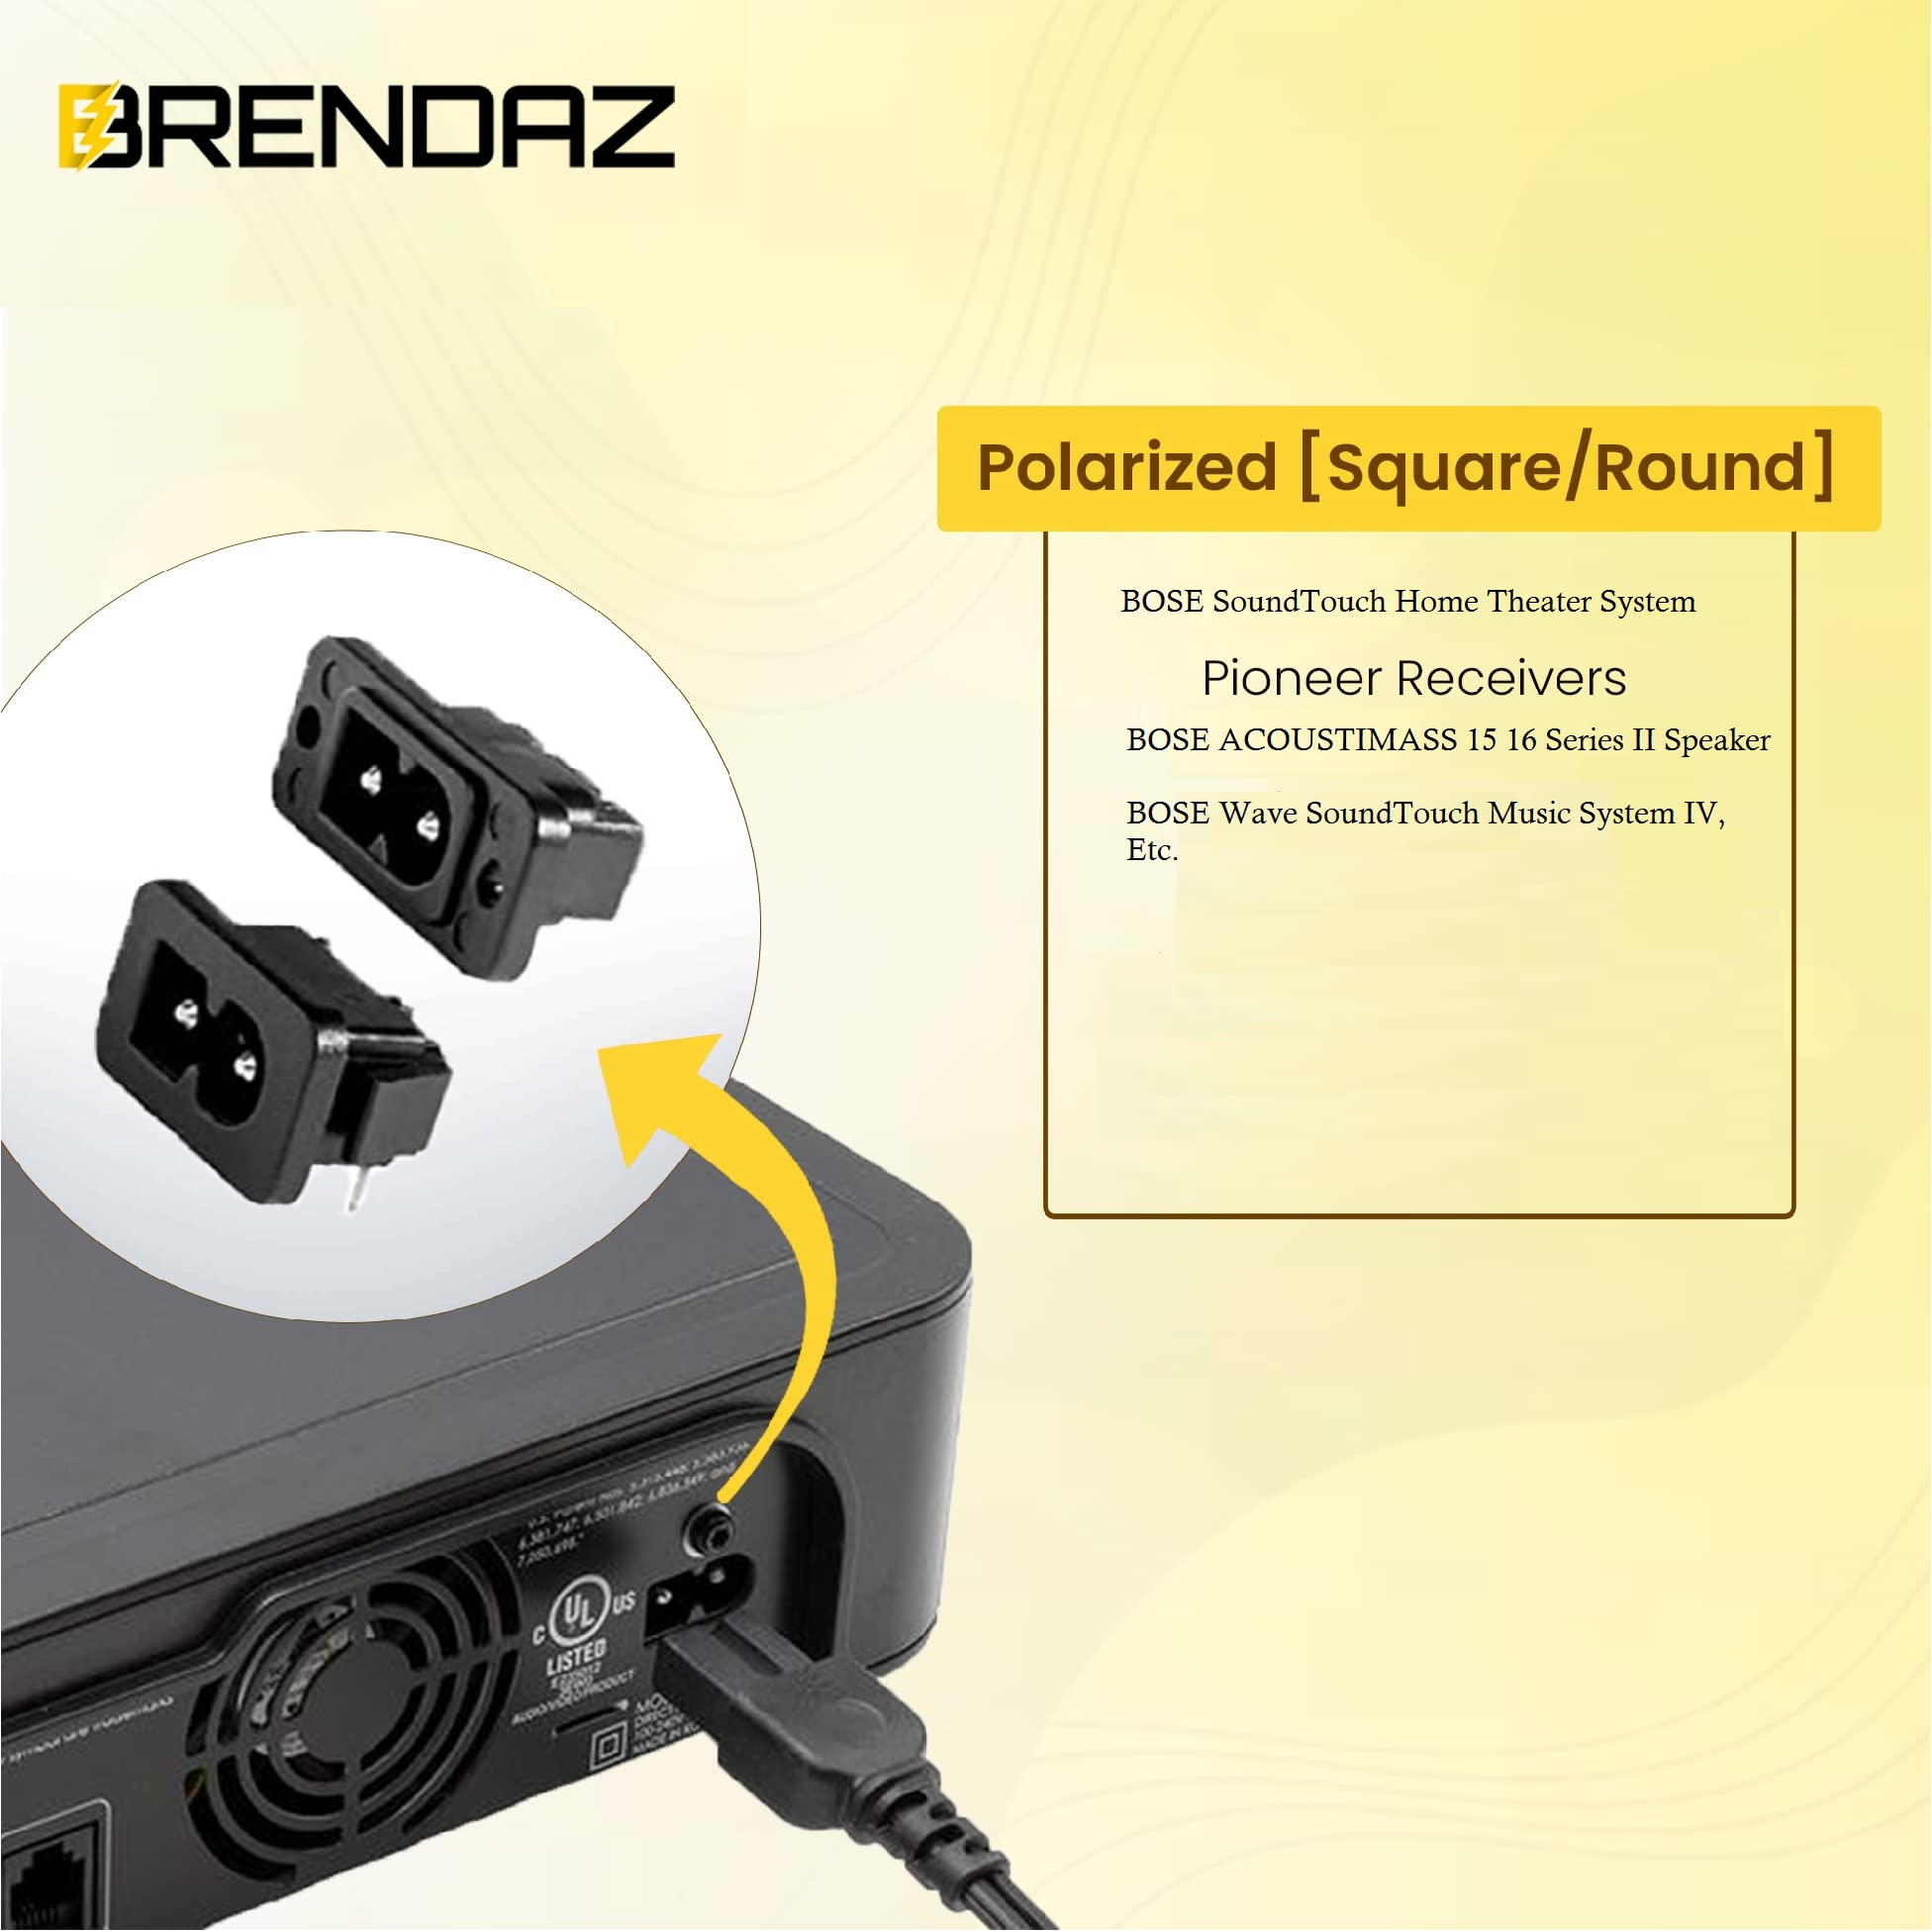 BRENDAZ - AC Polarized Power Cord for Bose SoundTouch 520 Home Theater System, SA-5 Amplifier, Companion 3, 5 Multimedia Speaker System, CineMate 15 Home Theater Speaker System (15-Feet)